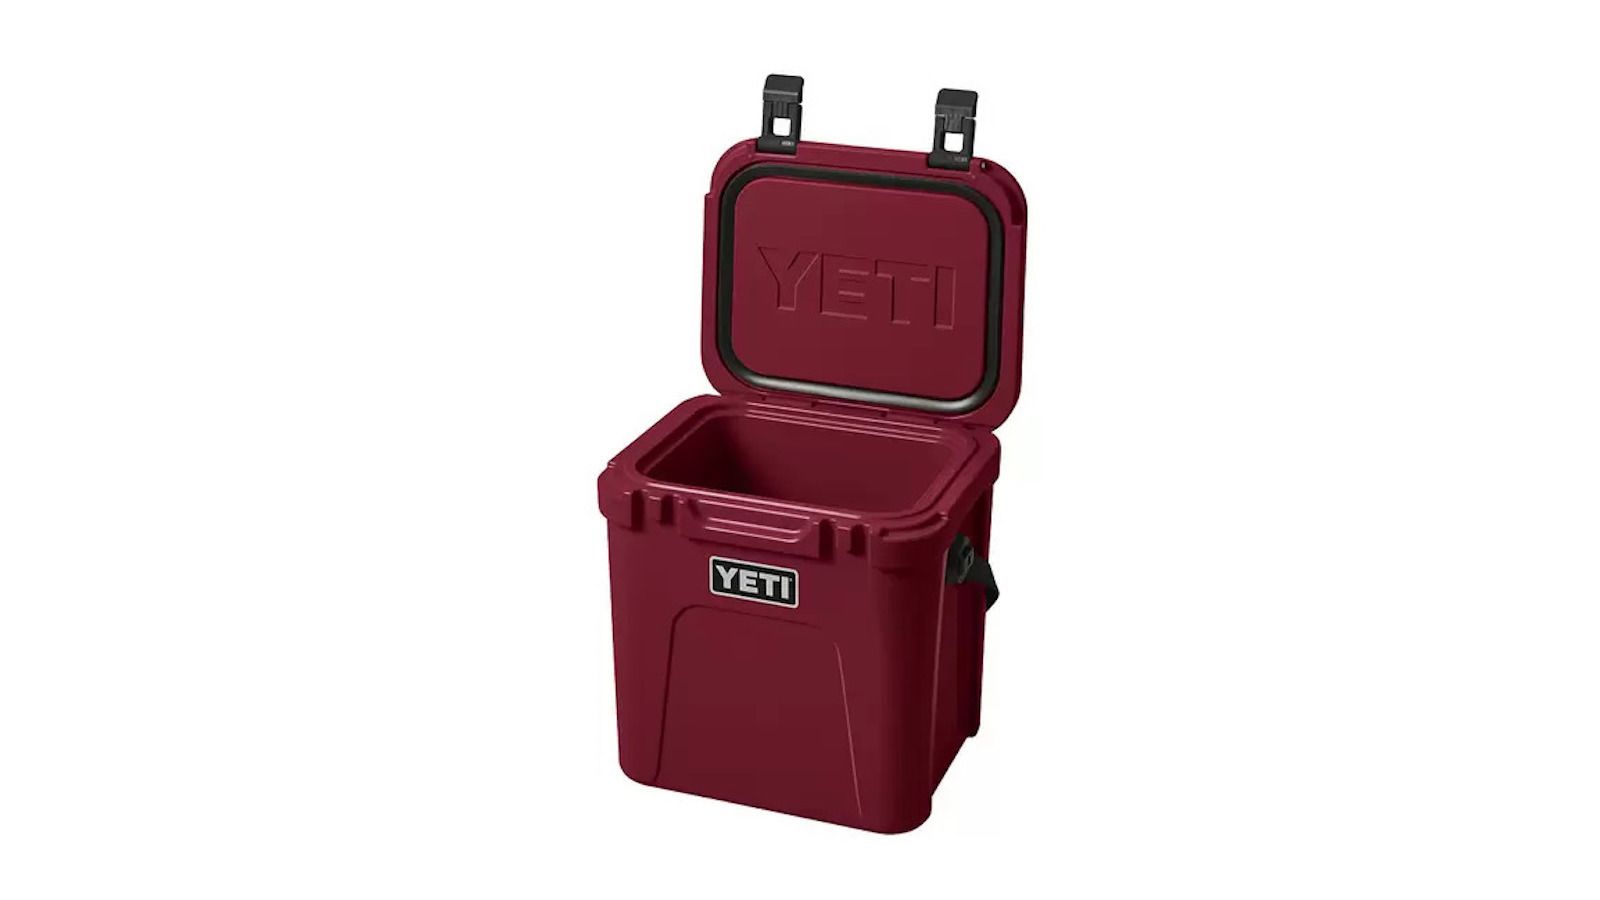 YETI's Limited-Time Fall Color Collection Is Inspired By Outdoor